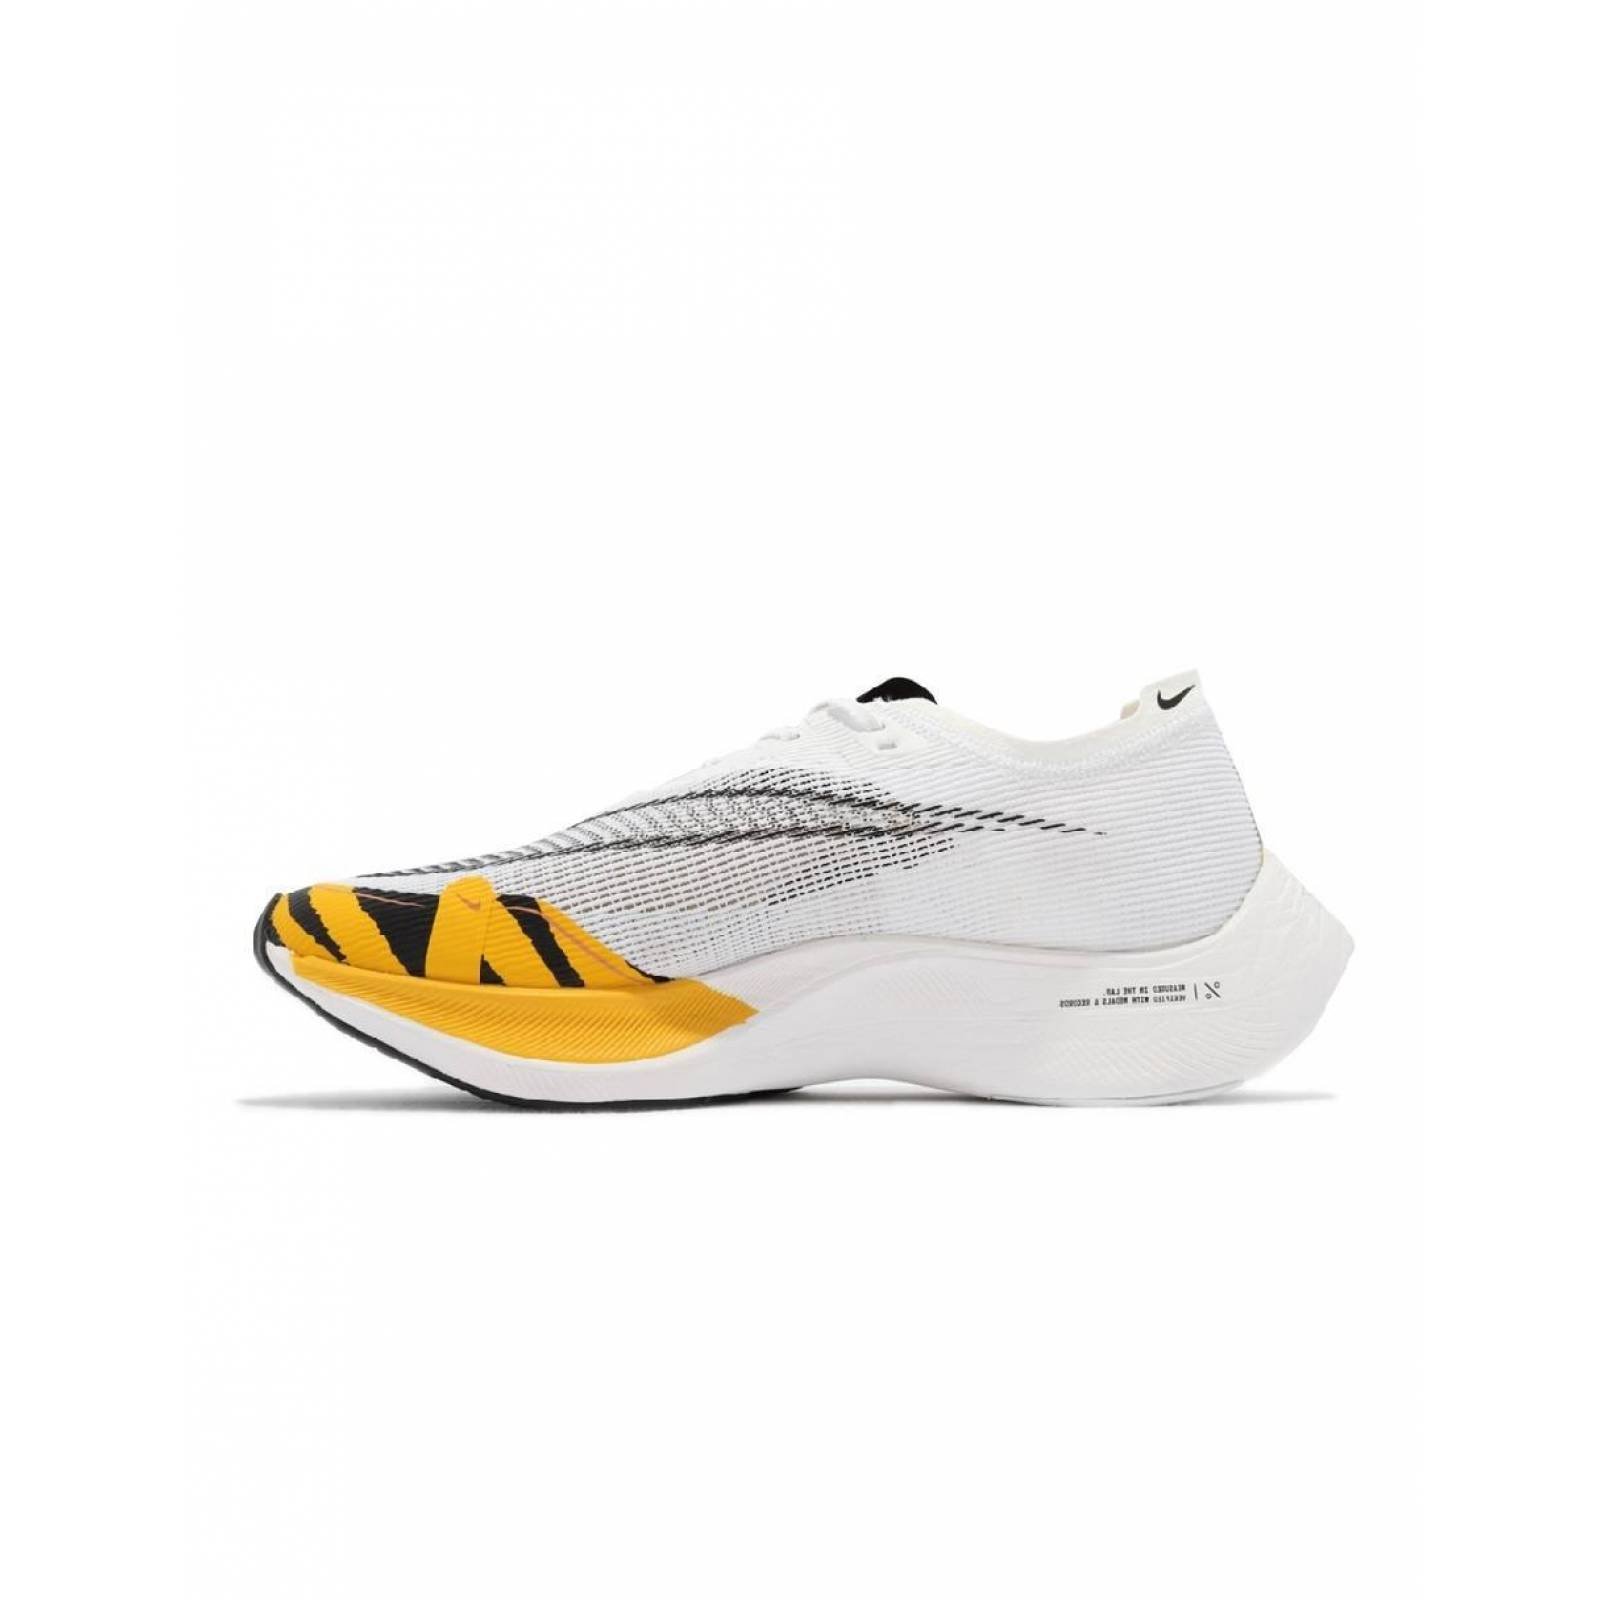 Nike Zoomx Vaporfly Next 2 Hombre Running Deportivos 